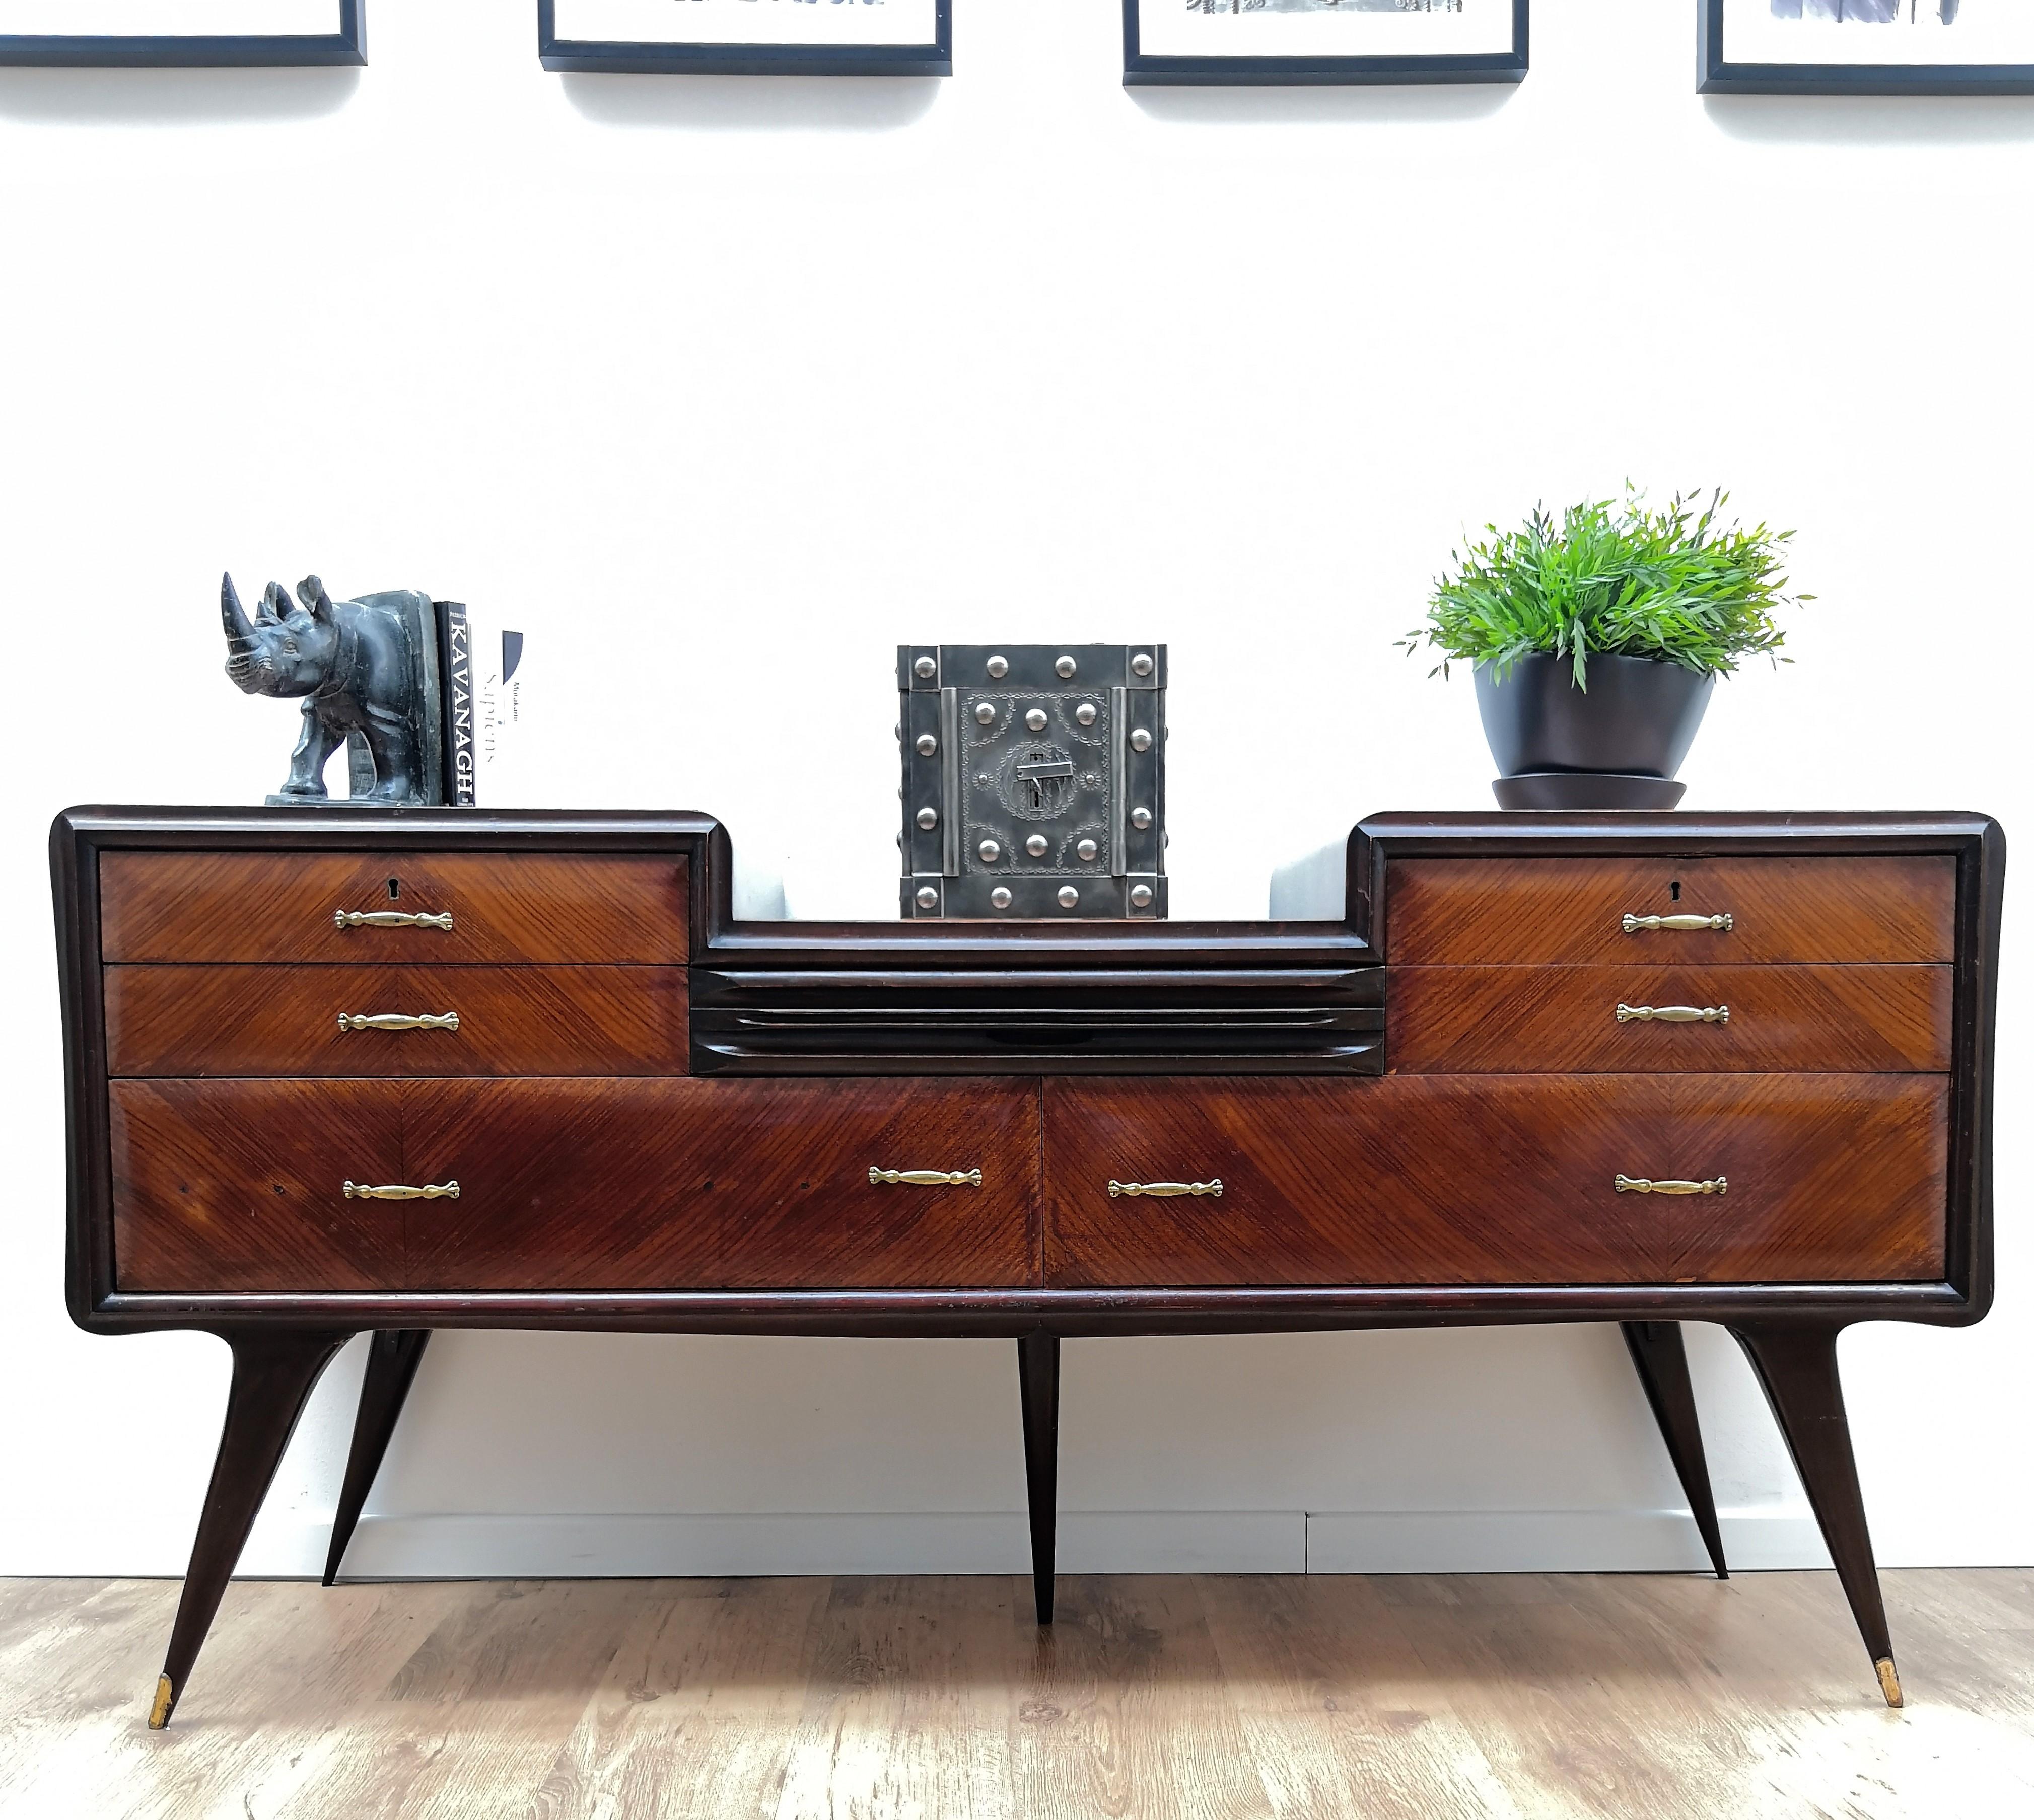 Beautiful Italian 1950s sideboard, credenza, buffet or chest of drawers with elegant and classic wood worked according its natural graining on the 6 drawers frontal drawers, with 3 levels copper-lacquered glass tops. A central hidden drawer follows